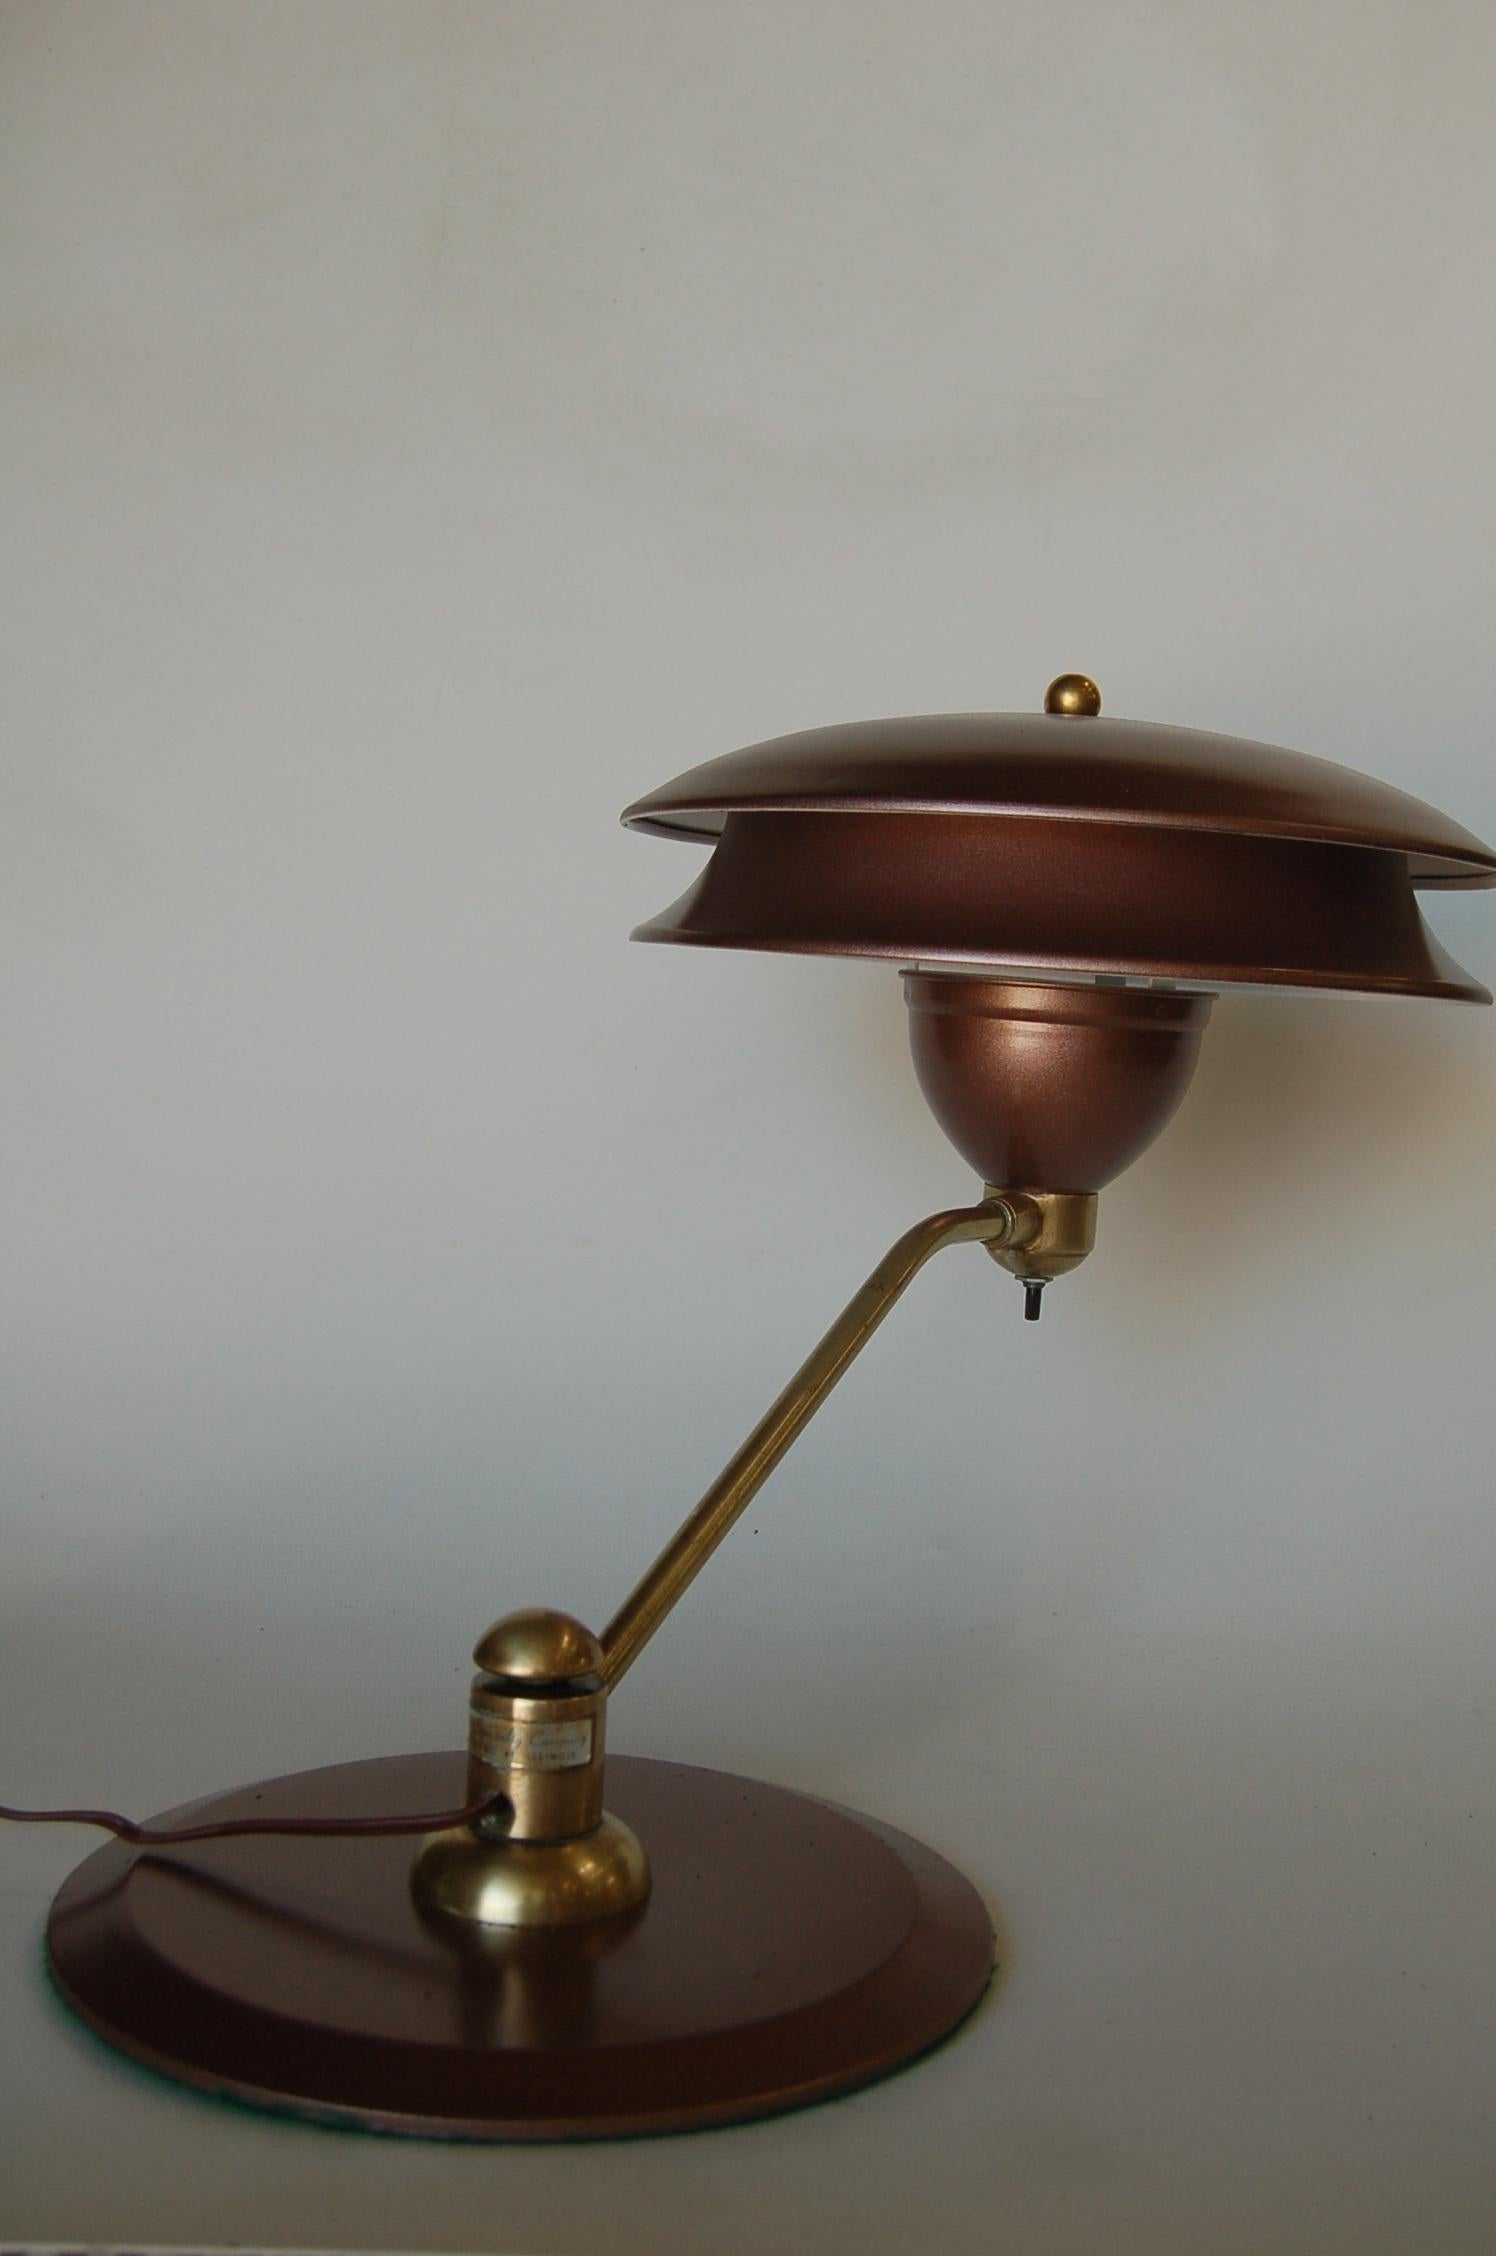 American Art Deco Desk Lamp with Large Double Saucer Shade by Art Specialty Co. For Sale